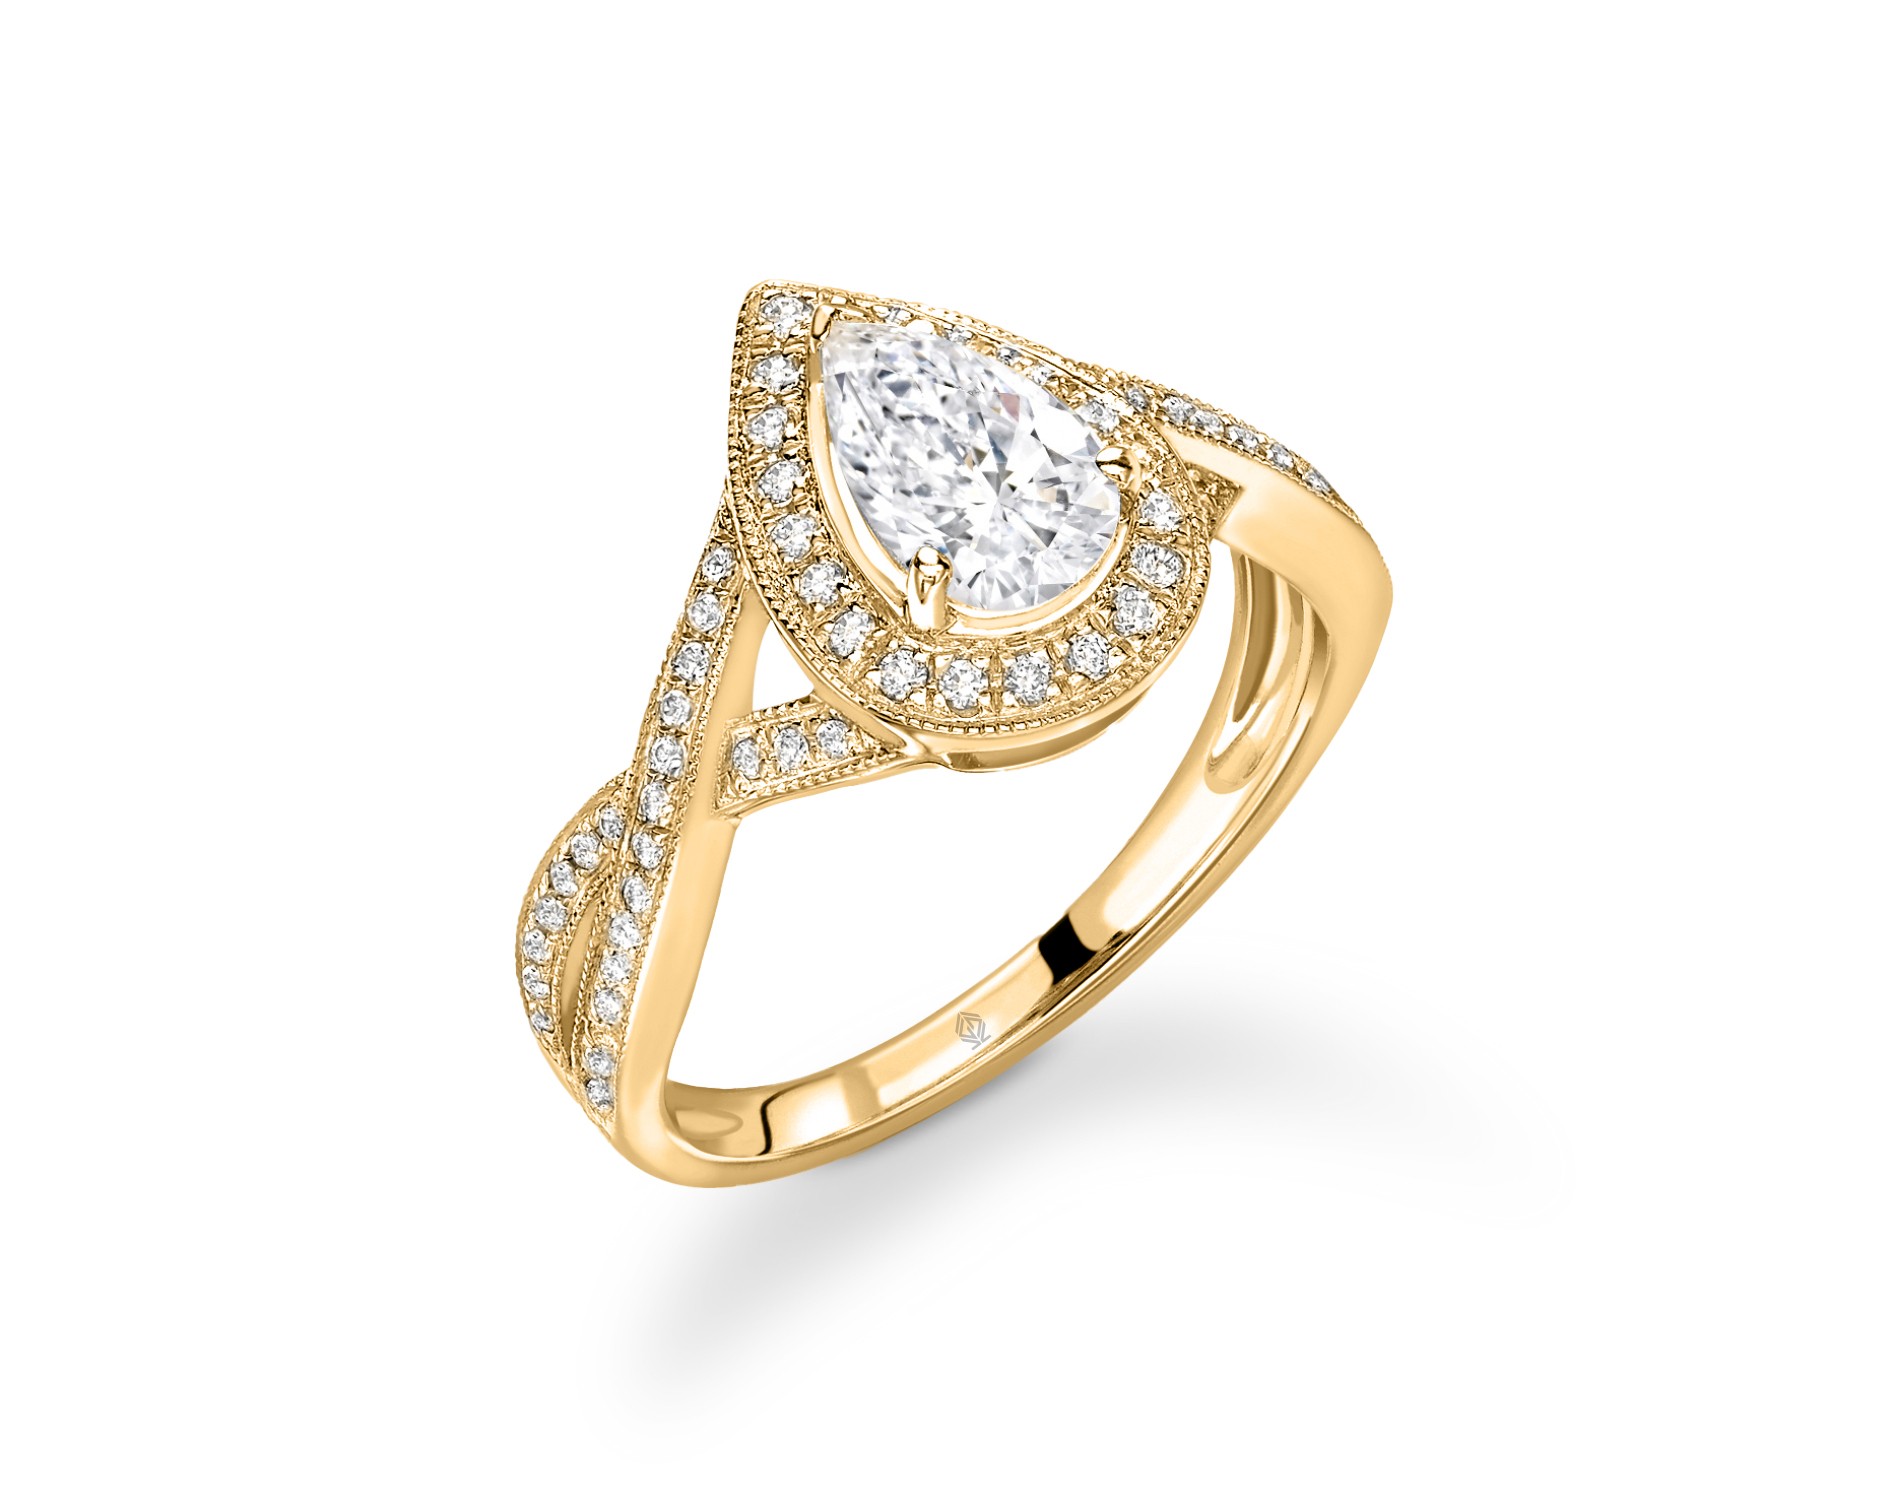 18K YELLOW GOLD VINTAGE MILGRAIN HALO PEAR CUT DIAMOND RING WITH TWISTED SHANK AND SIDE STONES PAVE SET